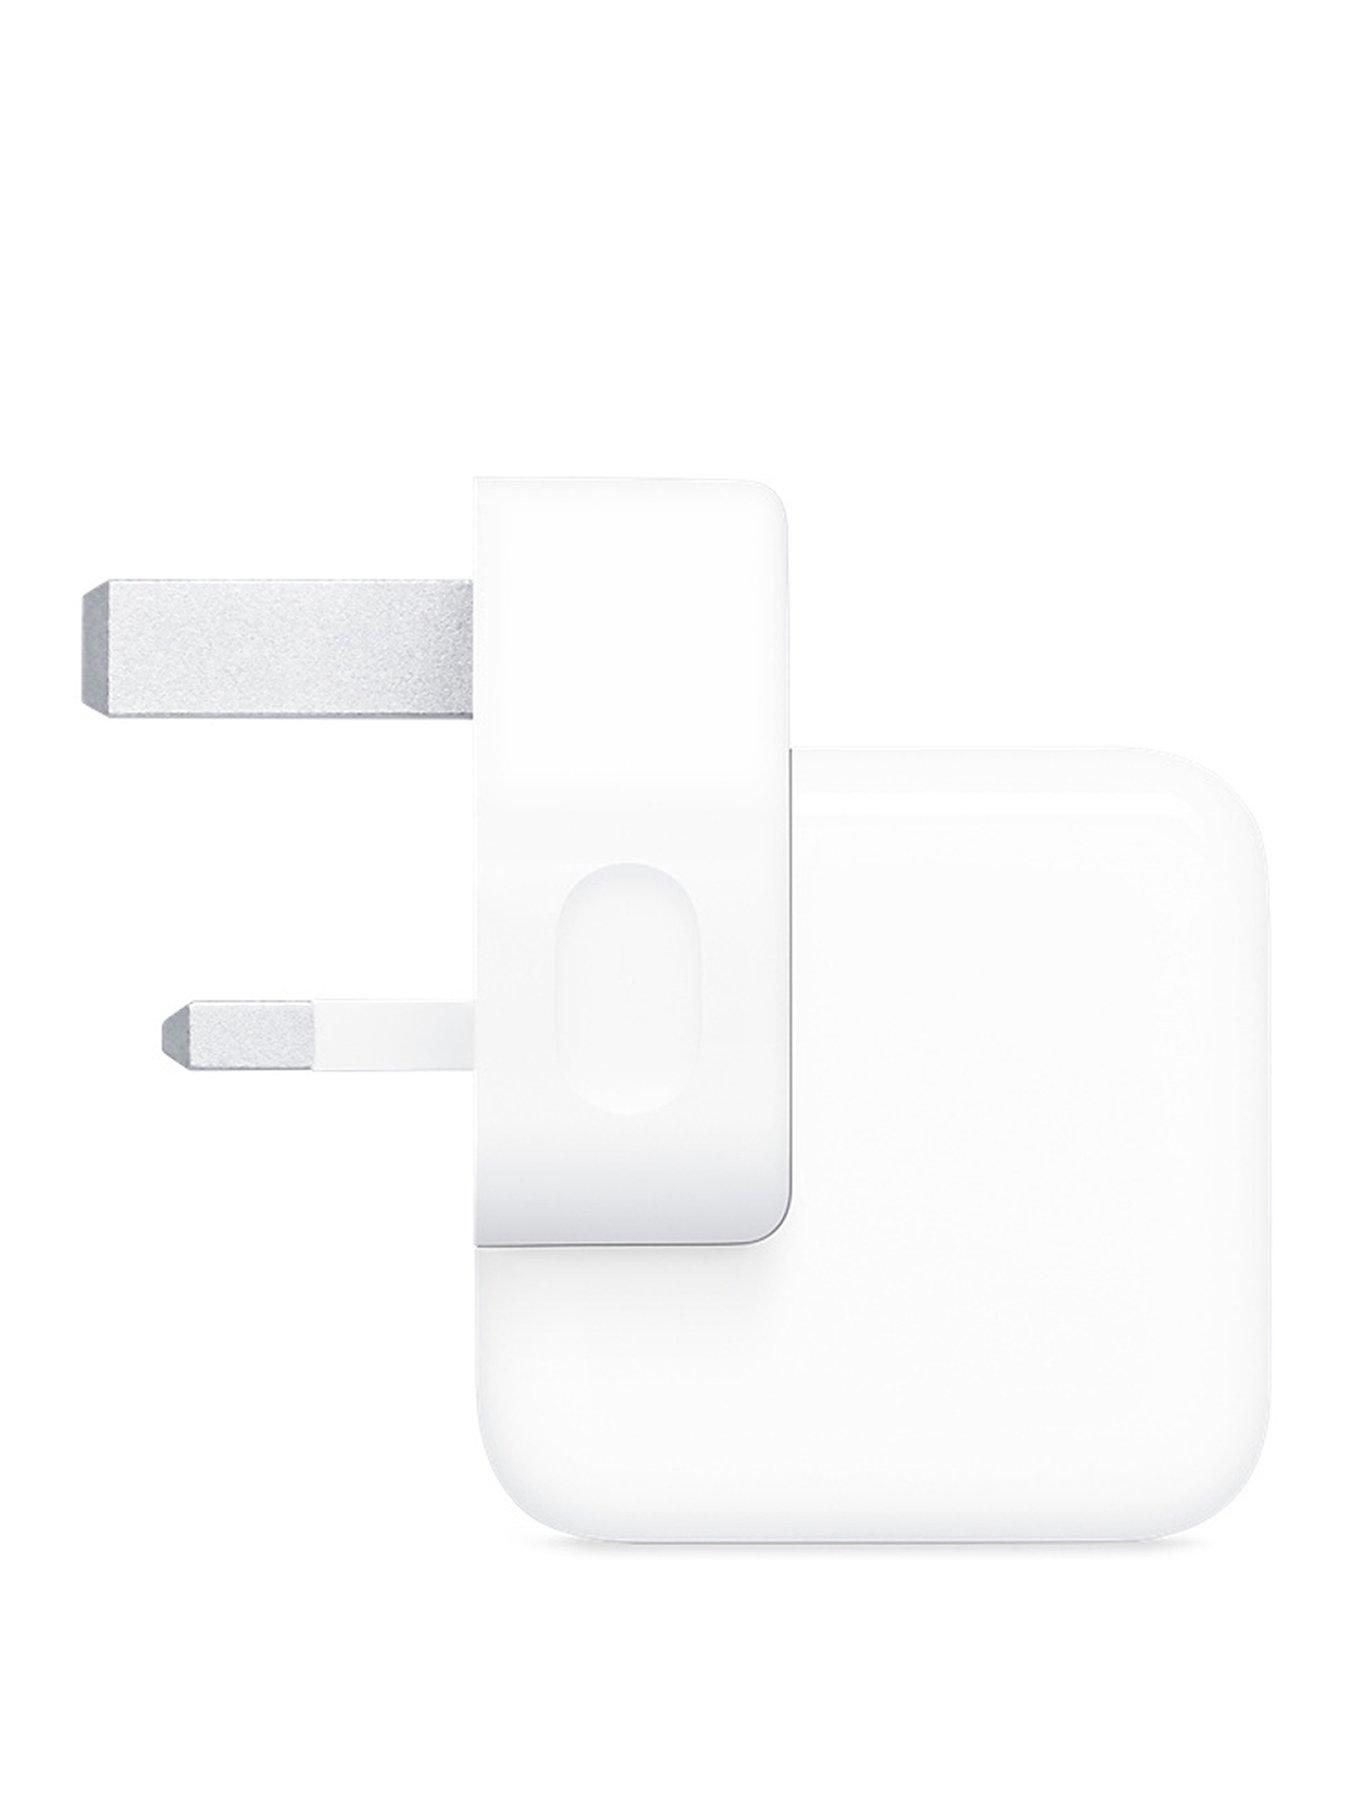 Apple 12W Genuine USB Wall Power Adapter Charger Lightning Cable for iPad  iPhone